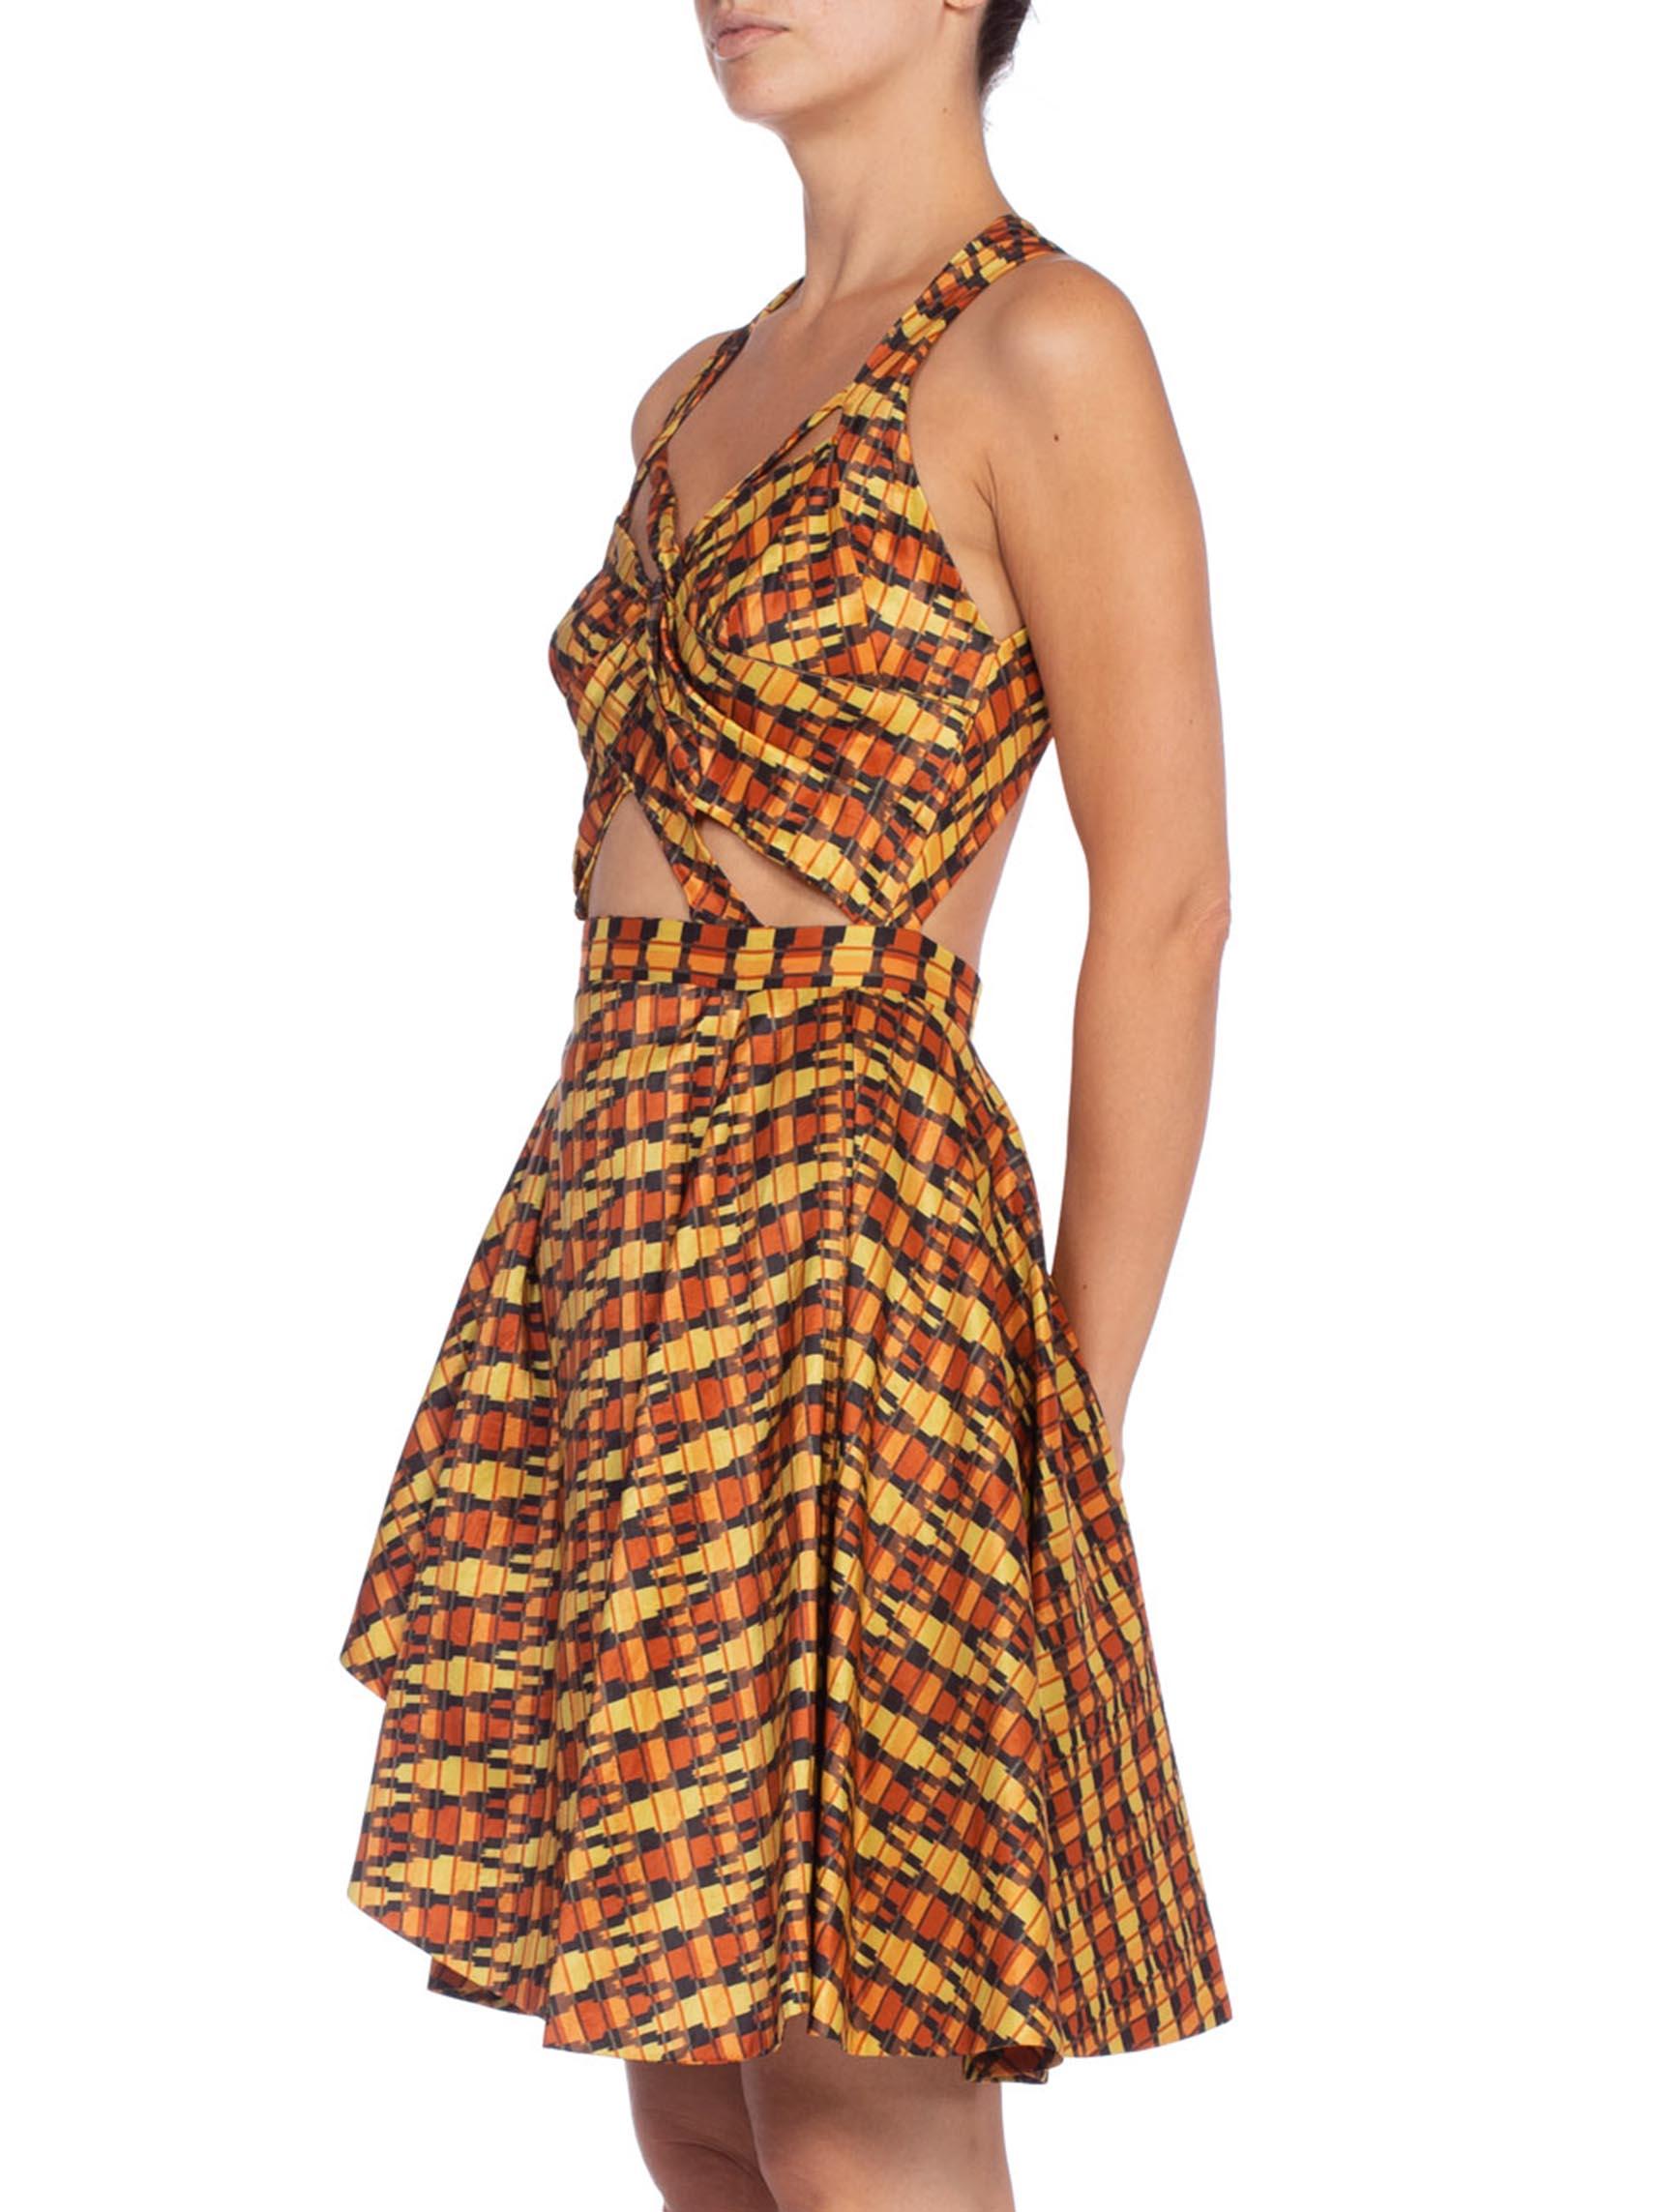 MORPHEW COLLECTION Hand Woven Silk Ikat Dress With Peek-A-Boo Front & Slit 1